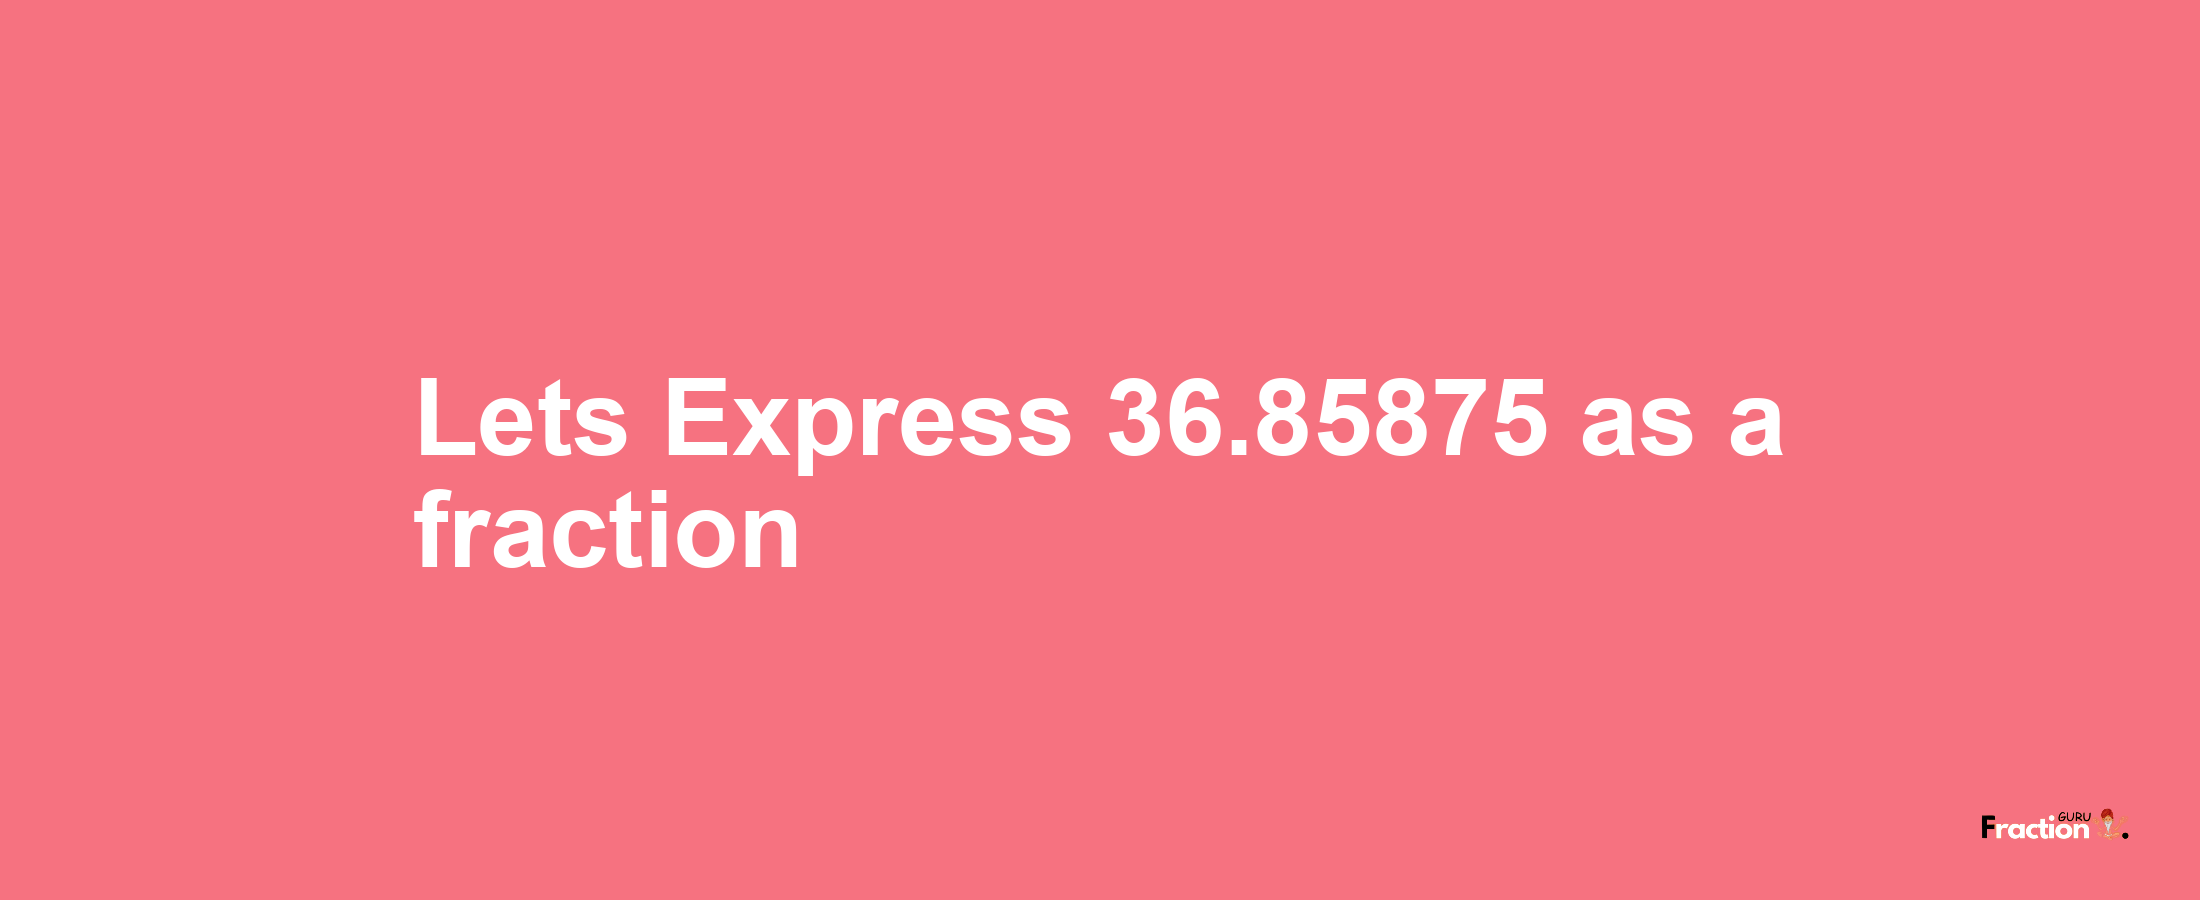 Lets Express 36.85875 as afraction